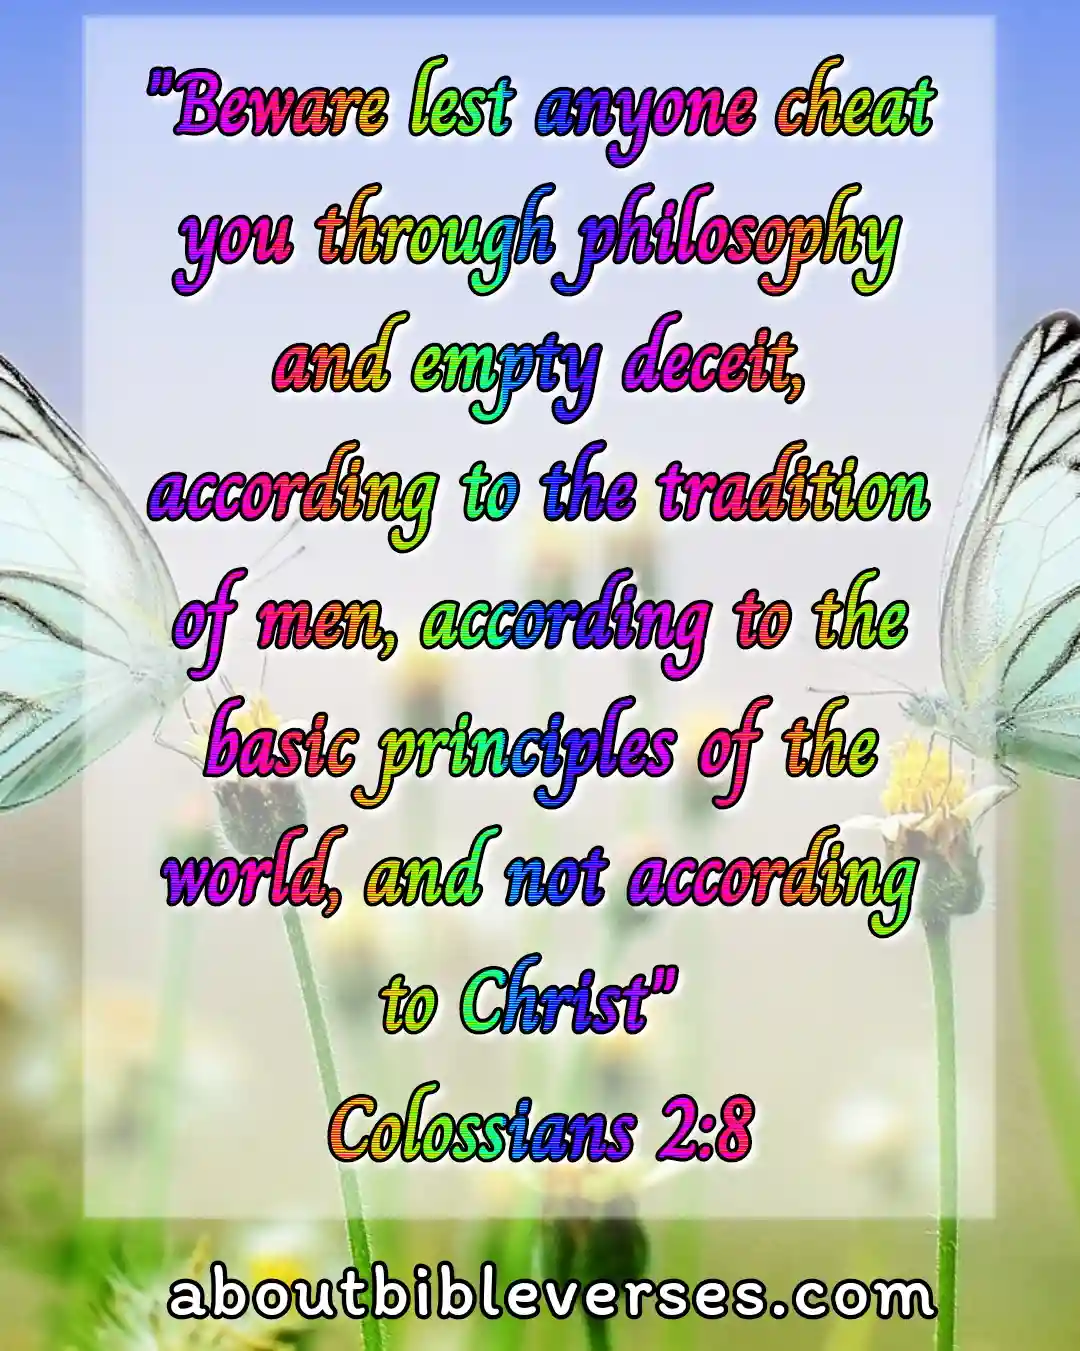 today bible verse (Colossians 2:8)